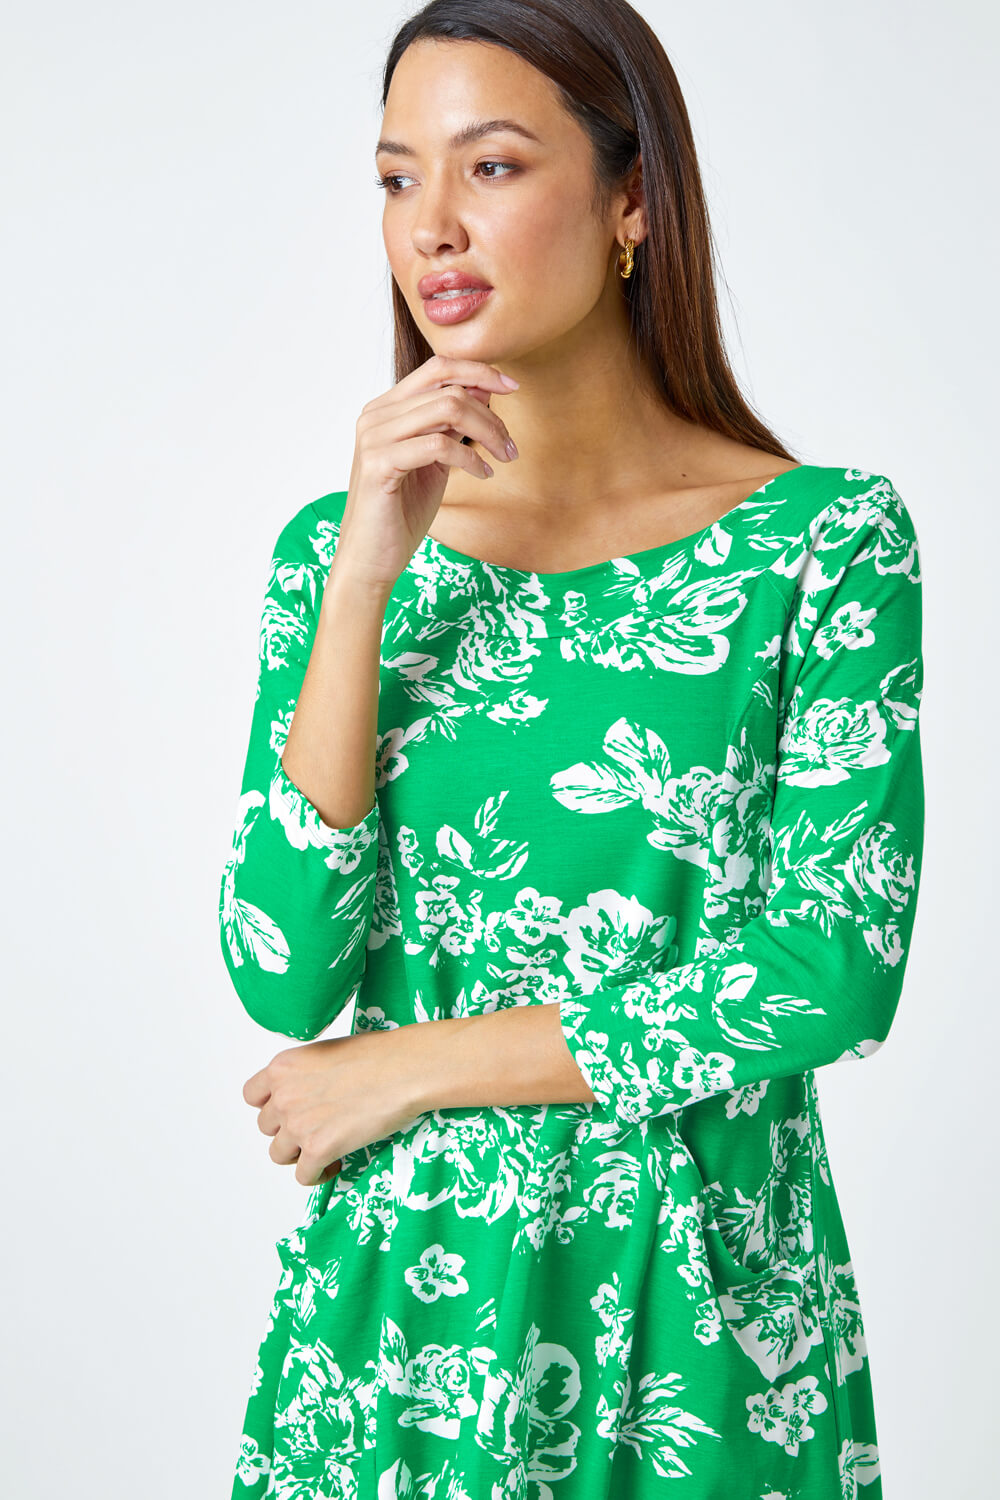 Green Floral Print Swing Stretch Top, Image 4 of 5